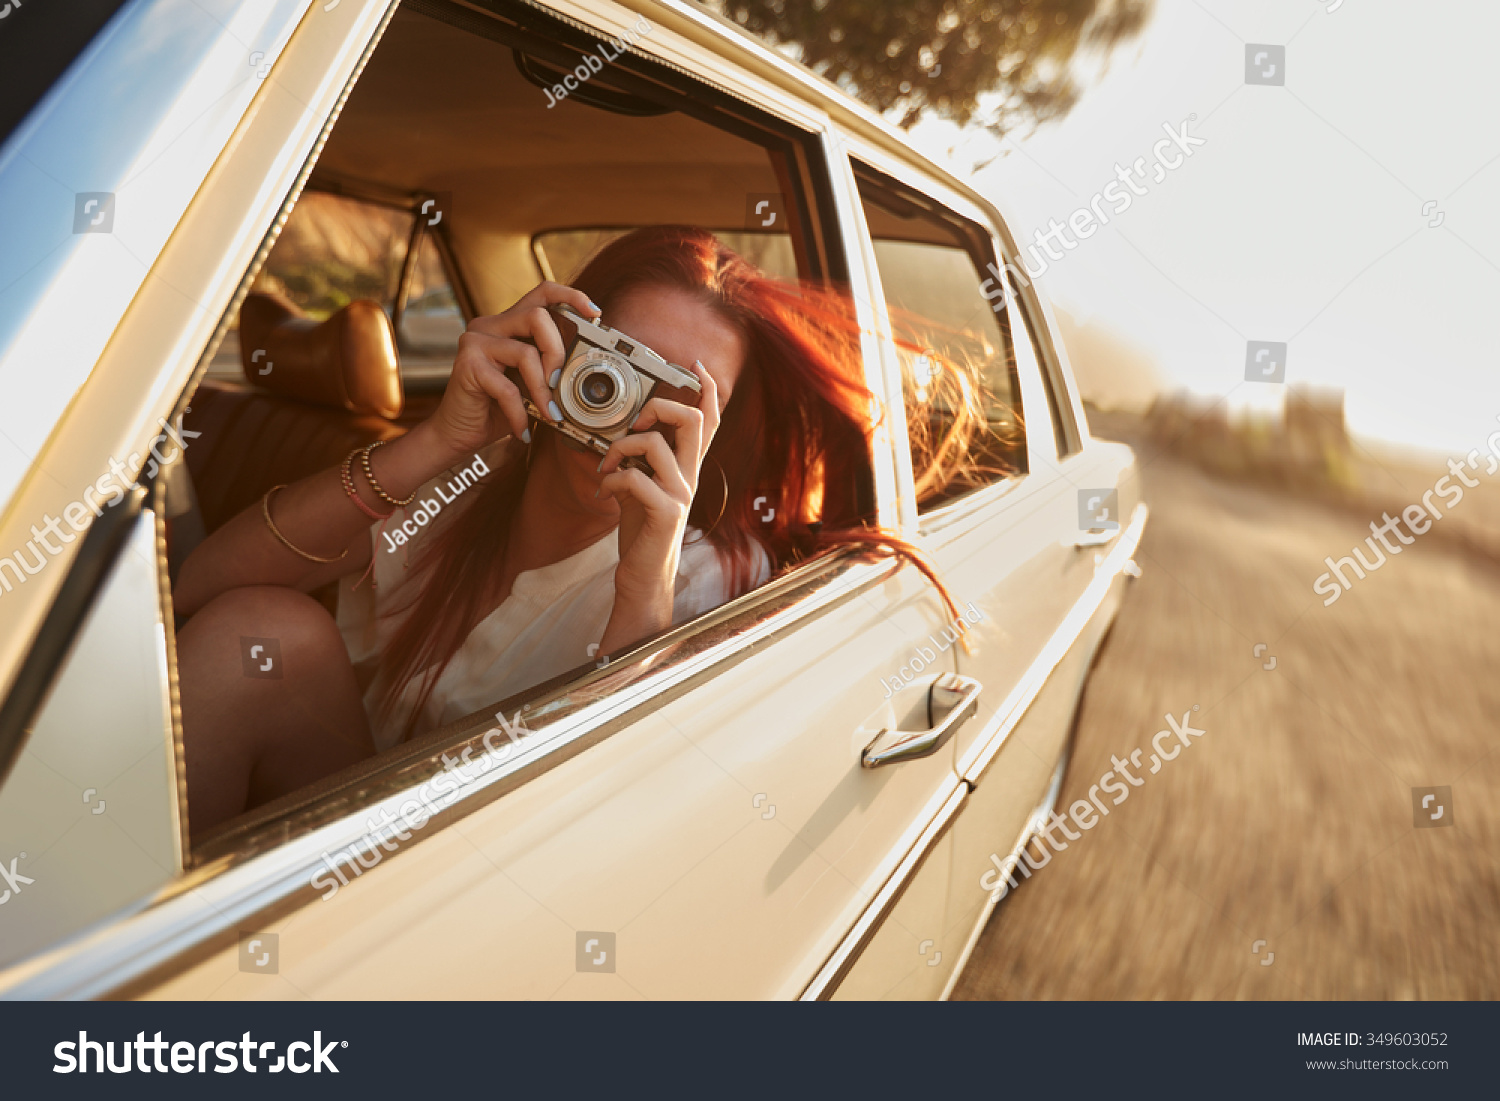 Shot of  young woman taking photos while sitting in a car. Female capturing a perfect road trip moment. #349603052